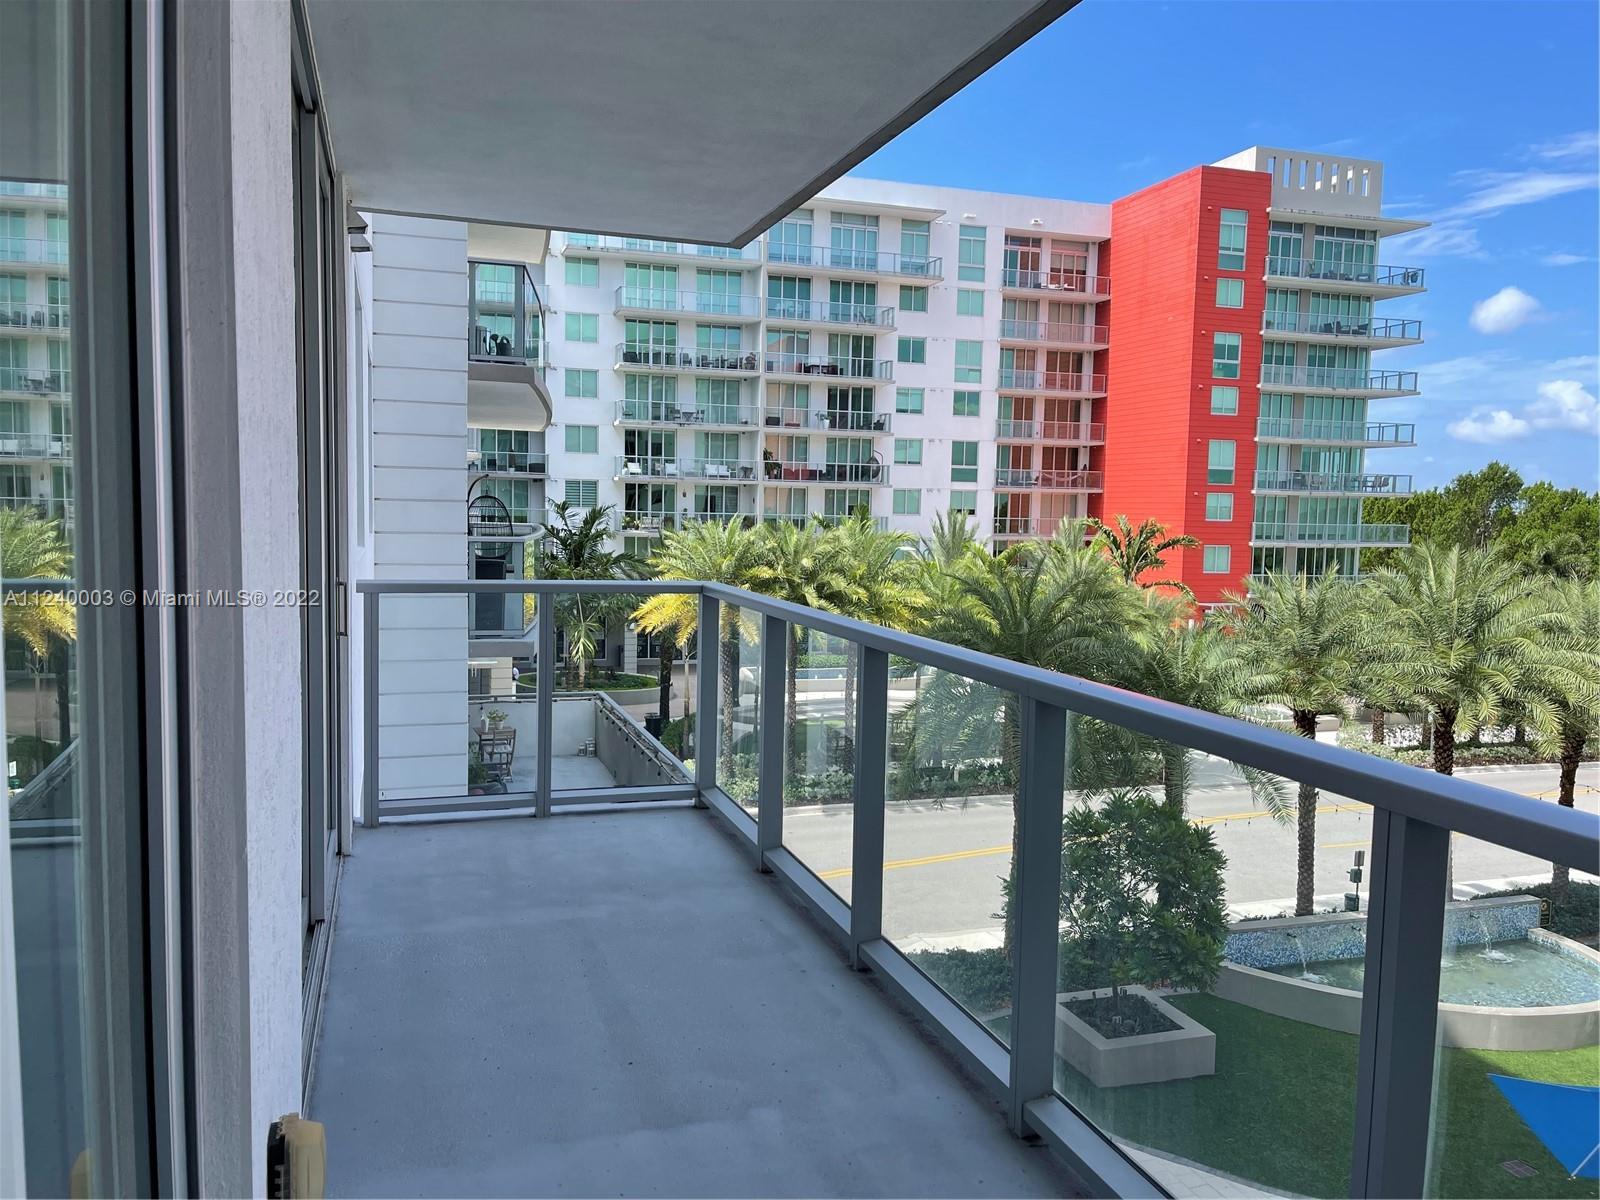 2 bedroom, 2 baths. Open modern kitchen with stainless steel appliances. Balcony with great Skyline views. Near to supermarket, restaurants Malls and A+ Schools. Spacious walk-in closet and bathroom. Impact windows, sliding glass doors and energy-saving air-conditioning.